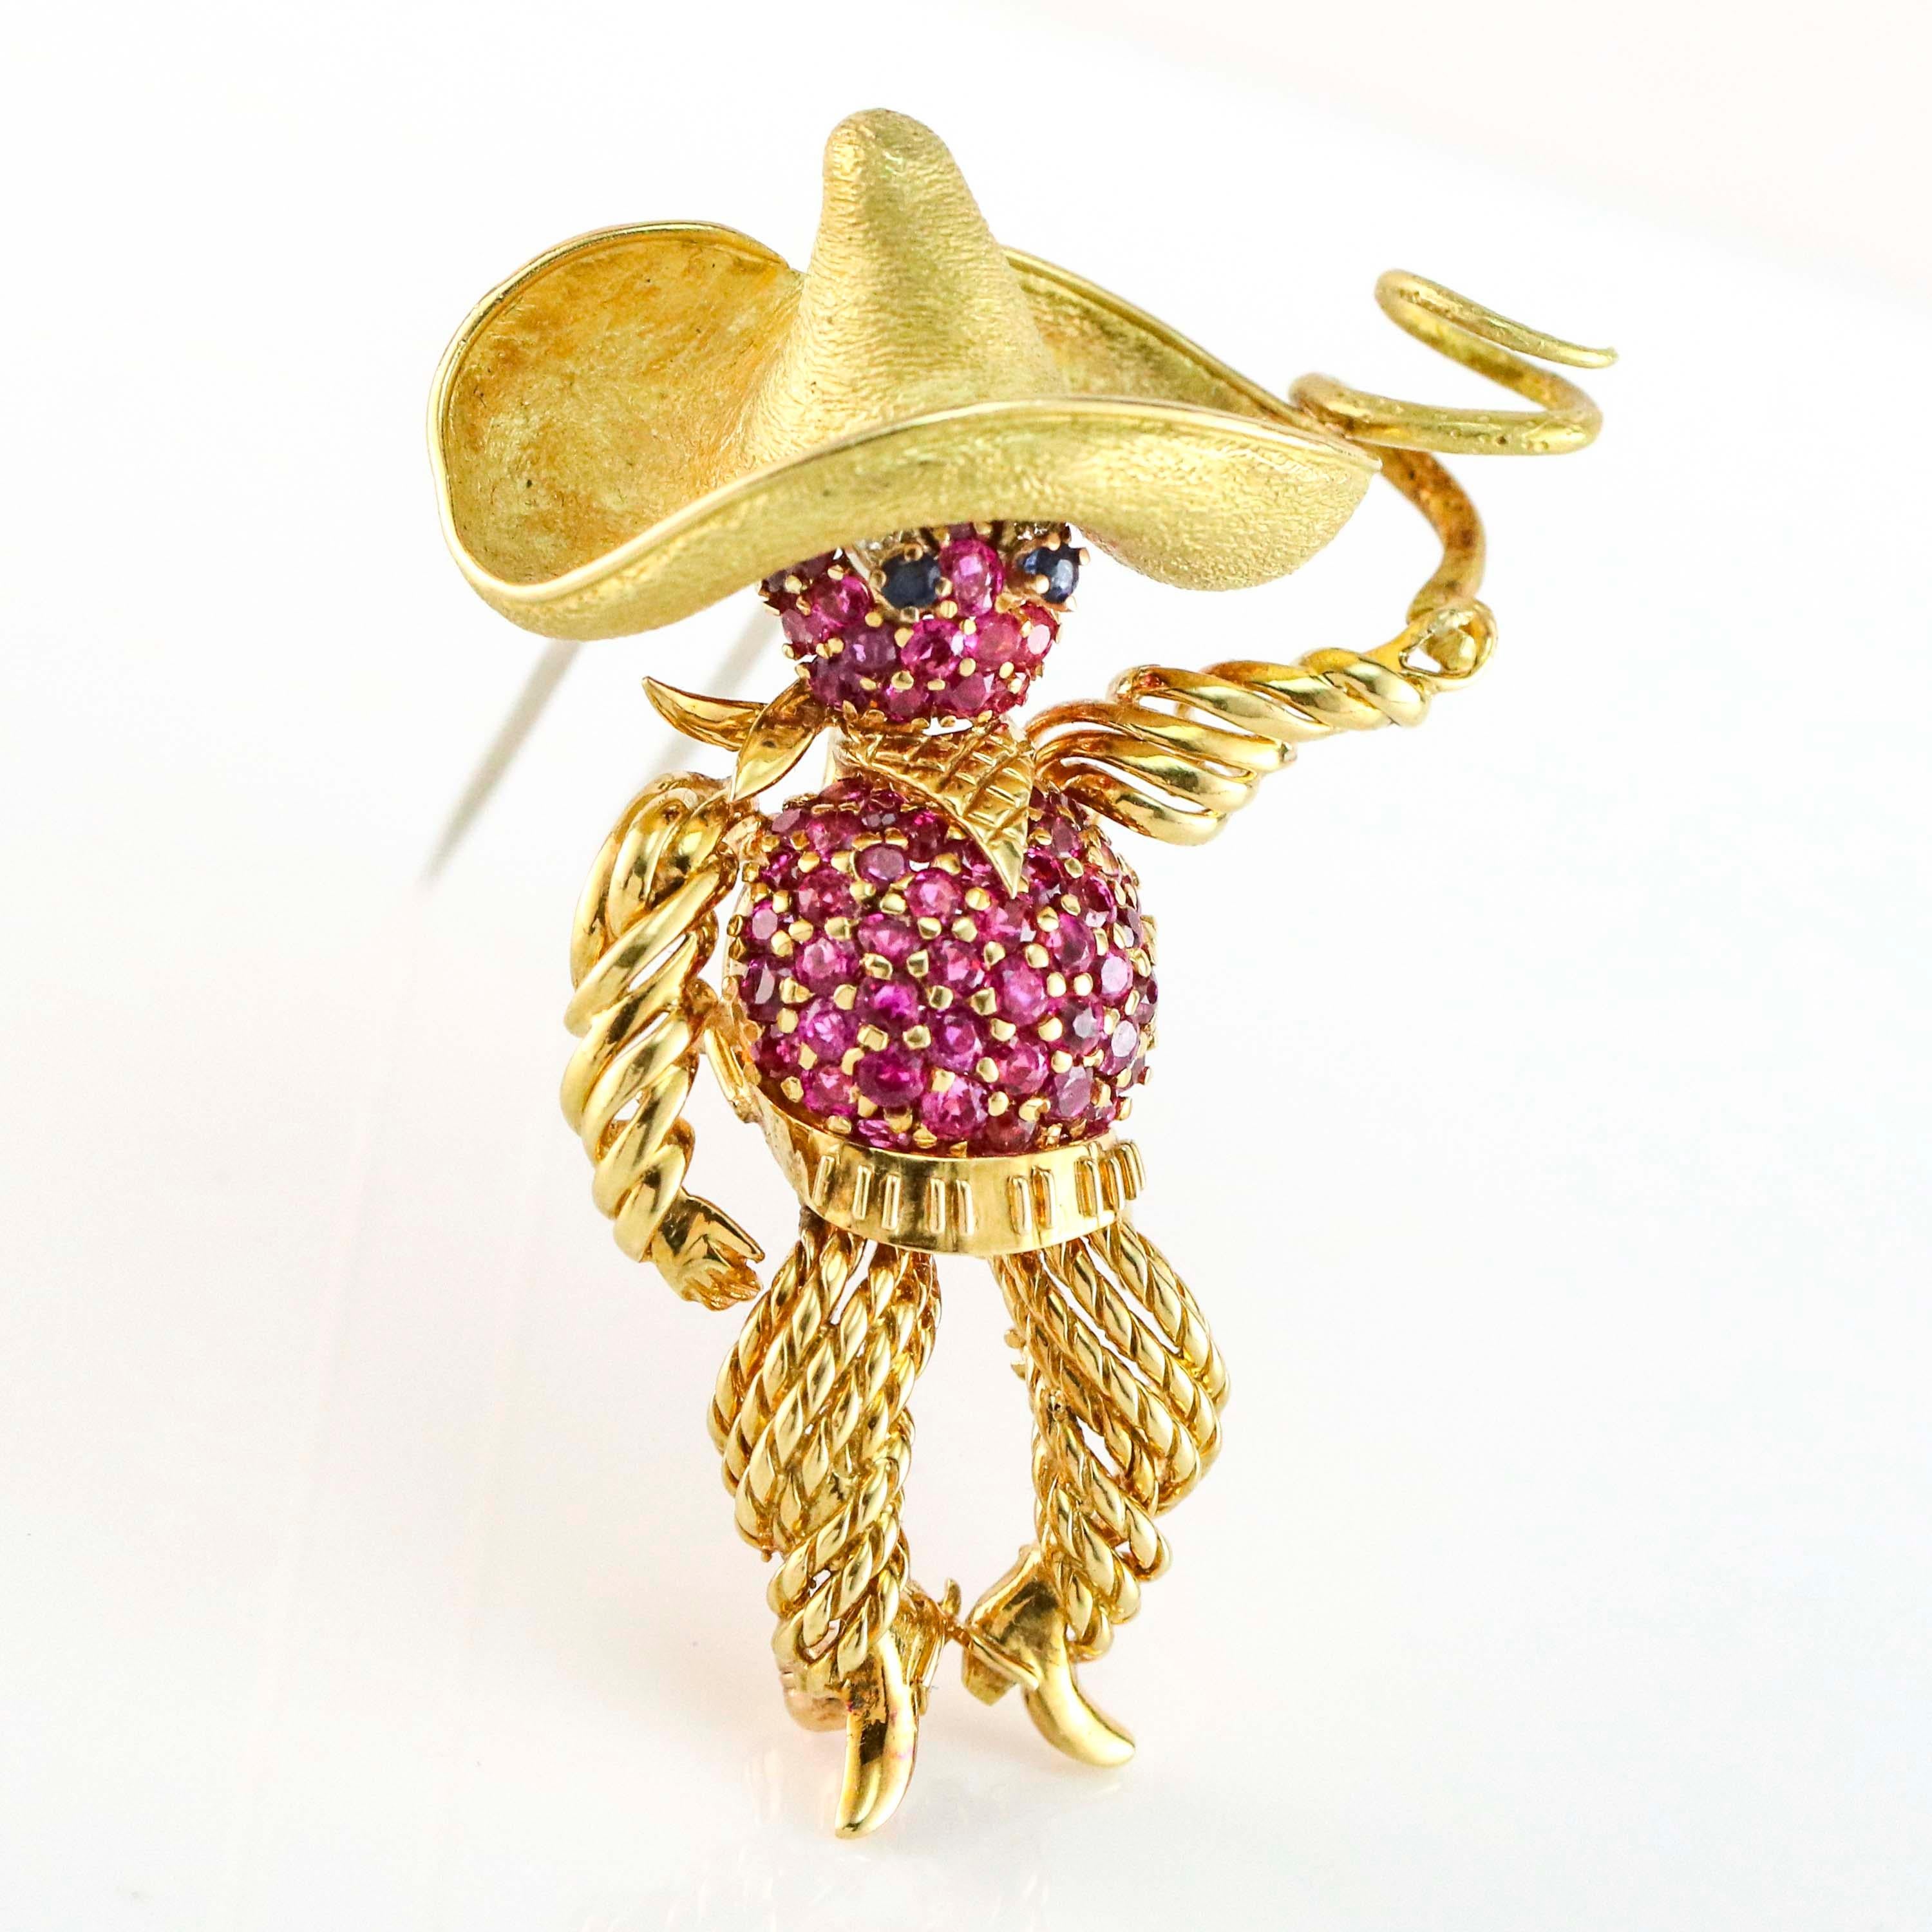 Cowboy with a sombrero and lasso pin in 18 karat yellow gold. The brooch is pave set with rubies, diamonds and sapphires.